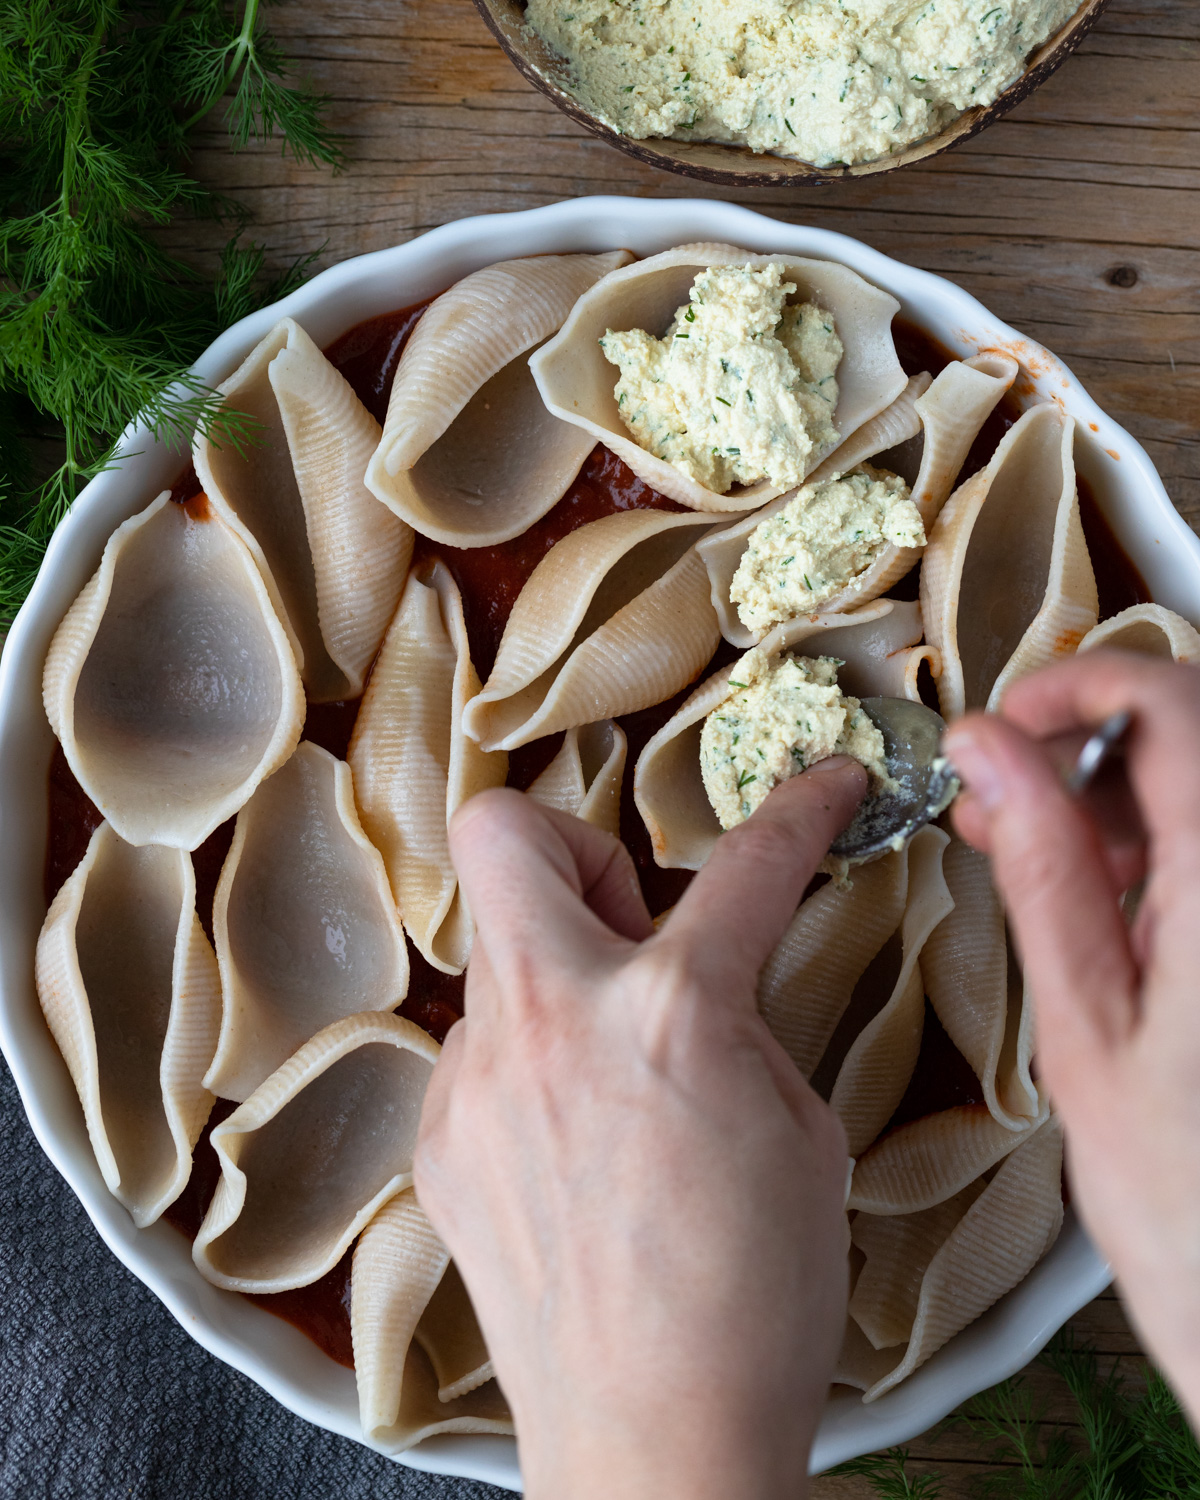 Top-down view of a plate of unbaked gluten-free pasta shells being stuffed with vegan ricotta. The dish is on a wooden table with fresh dill and a napkin.